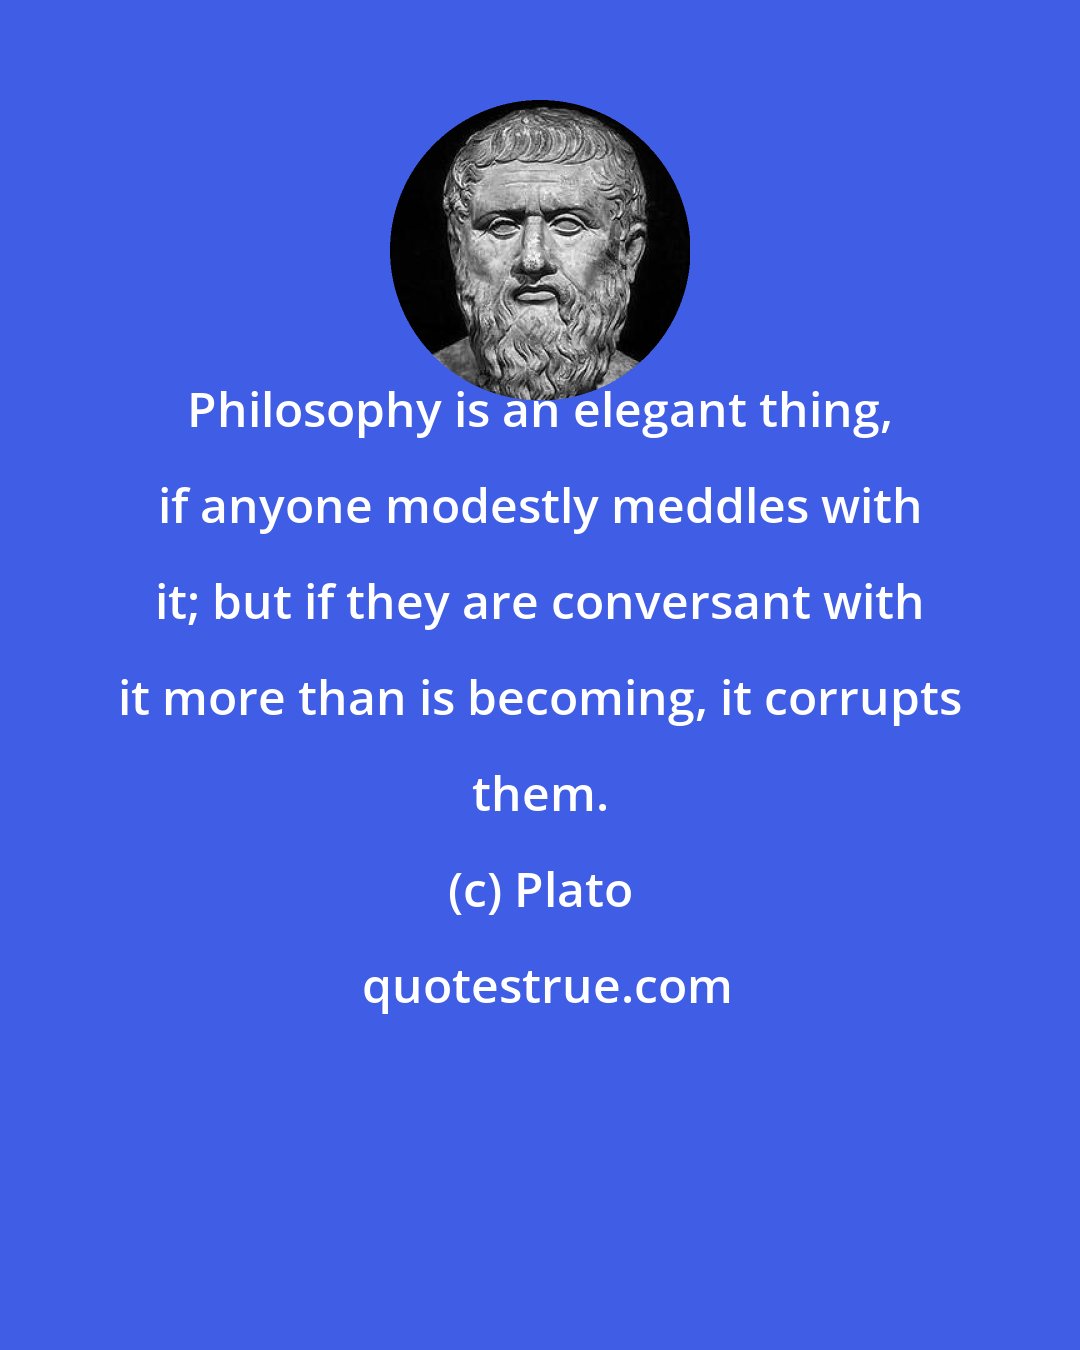 Plato: Philosophy is an elegant thing, if anyone modestly meddles with it; but if they are conversant with it more than is becoming, it corrupts them.